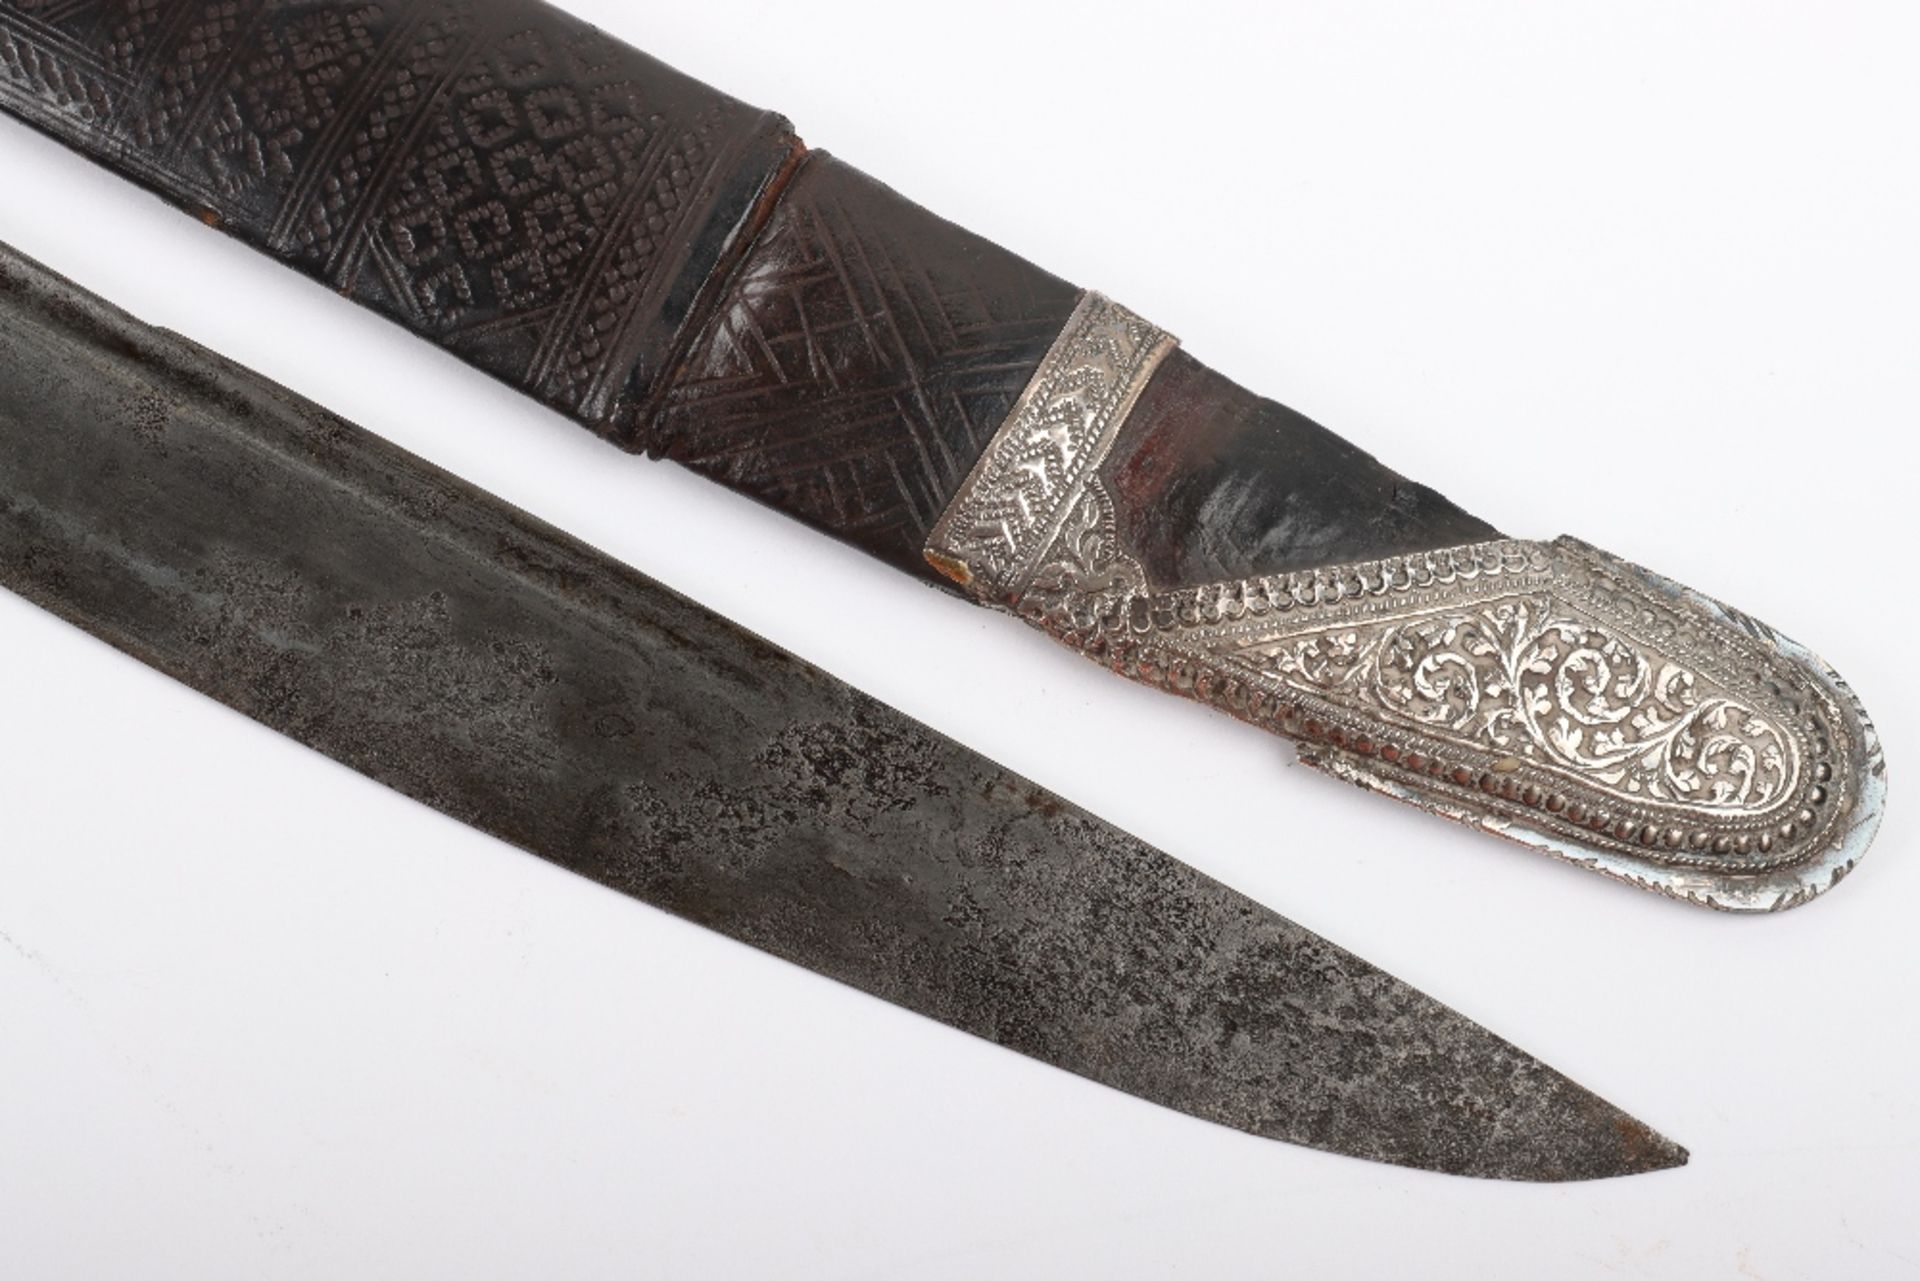 Omani Silver Mounted Sword, 19th Century - Image 3 of 9